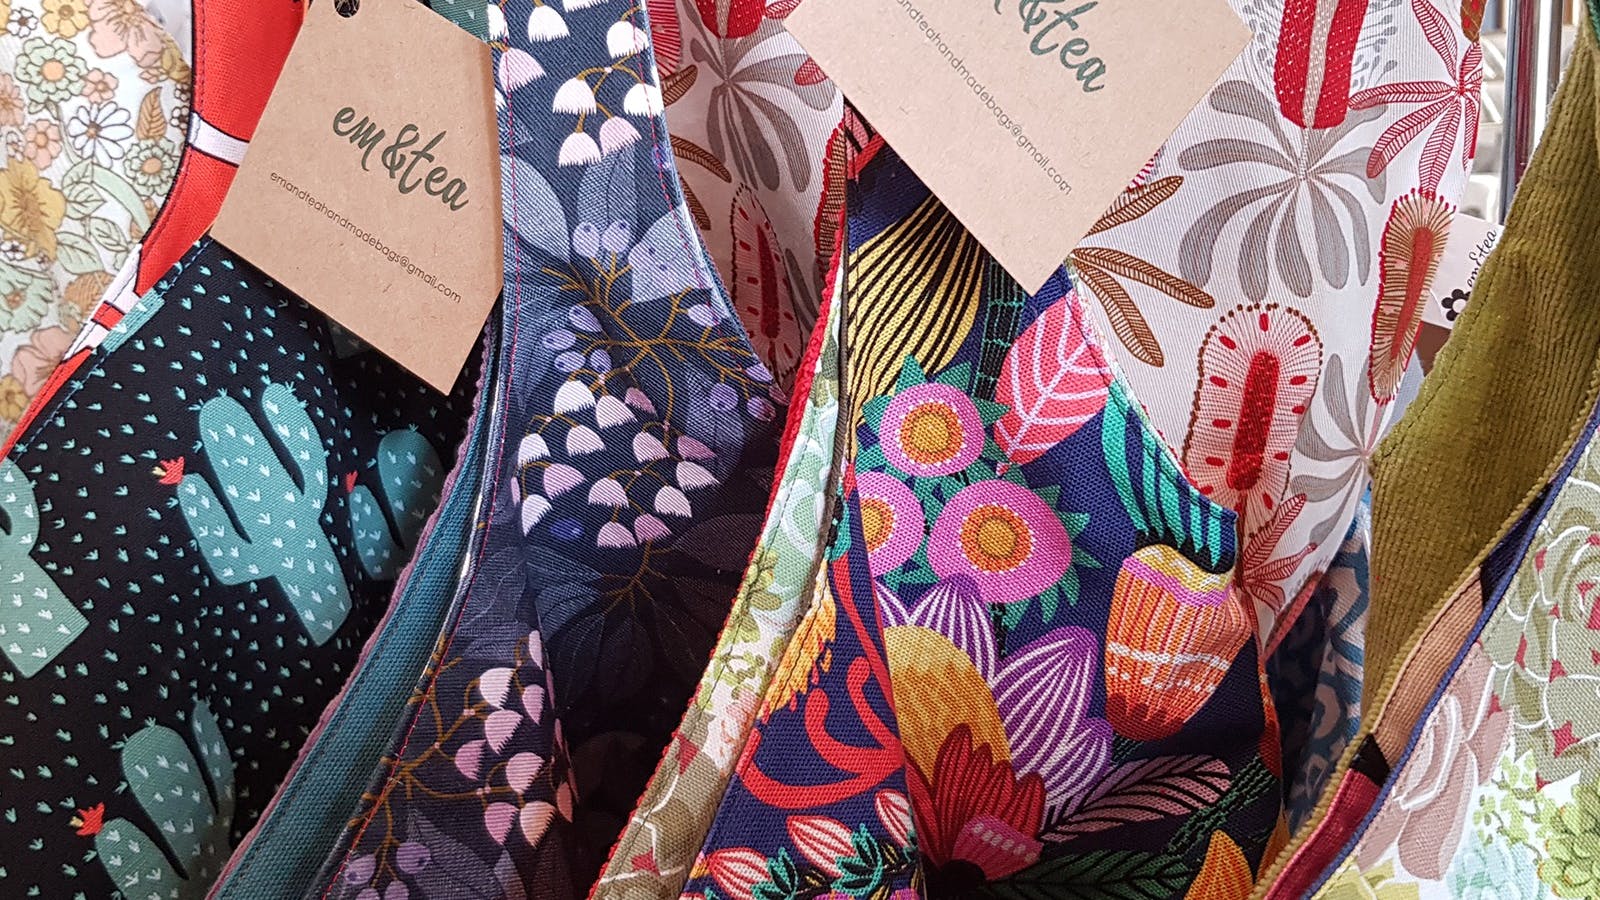 Emma McLeod's bags made with a variety of luscious fabric